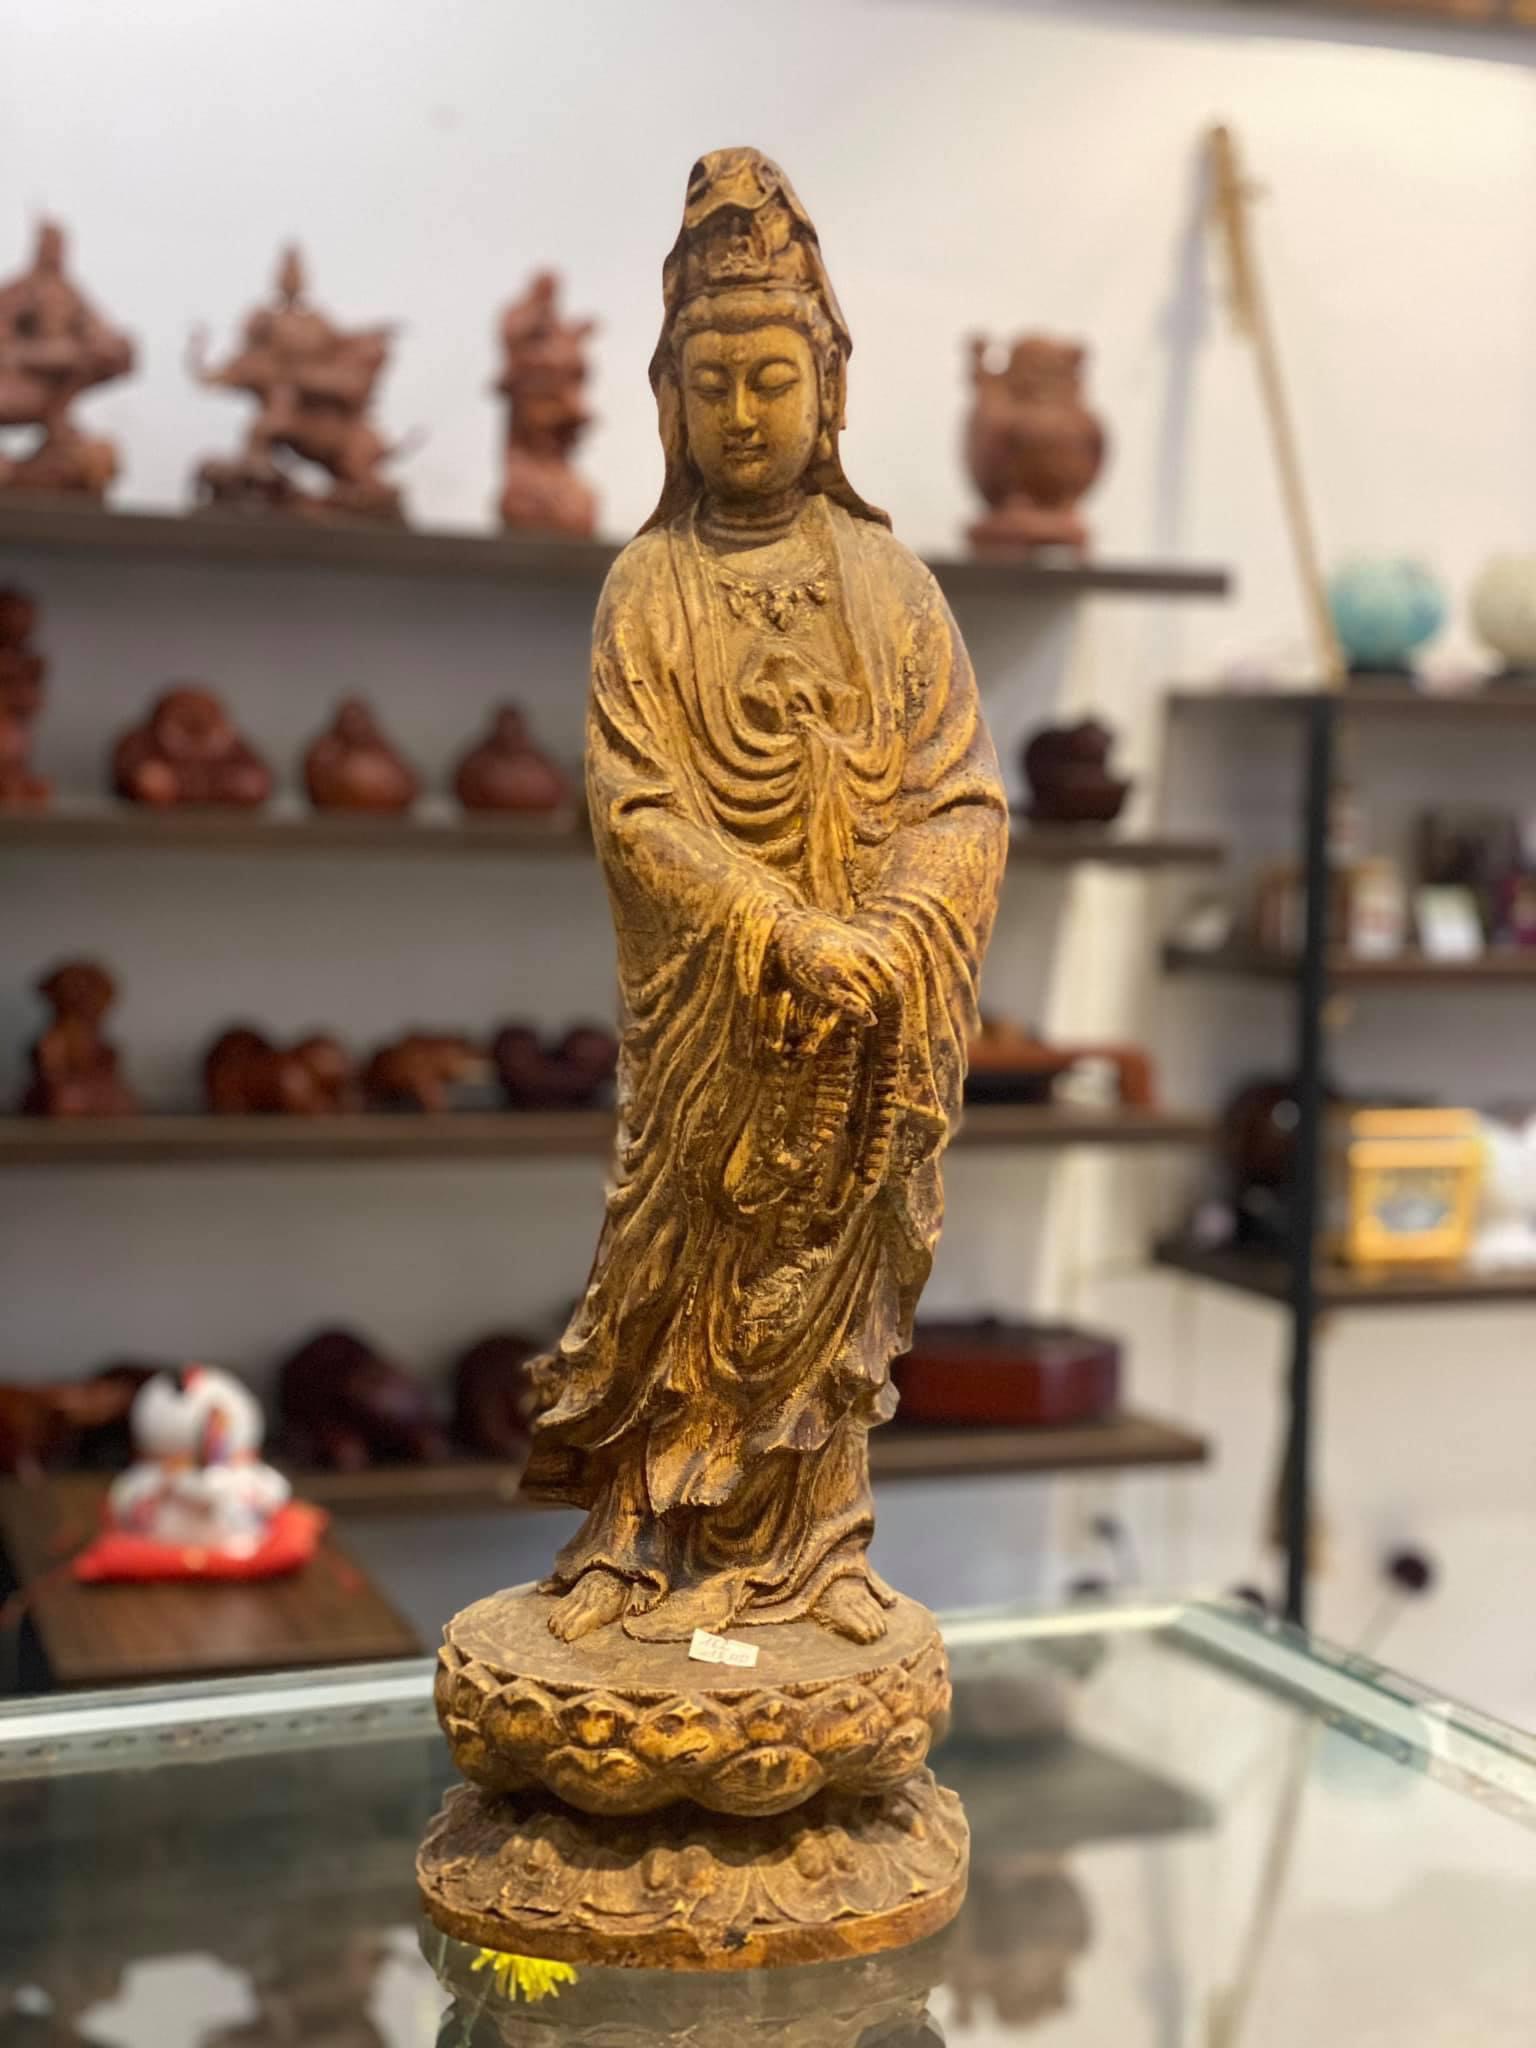 Displaying Agarwood Statues At Work And Living Space Brings Prosperity And Attracts Fortune To The Owner